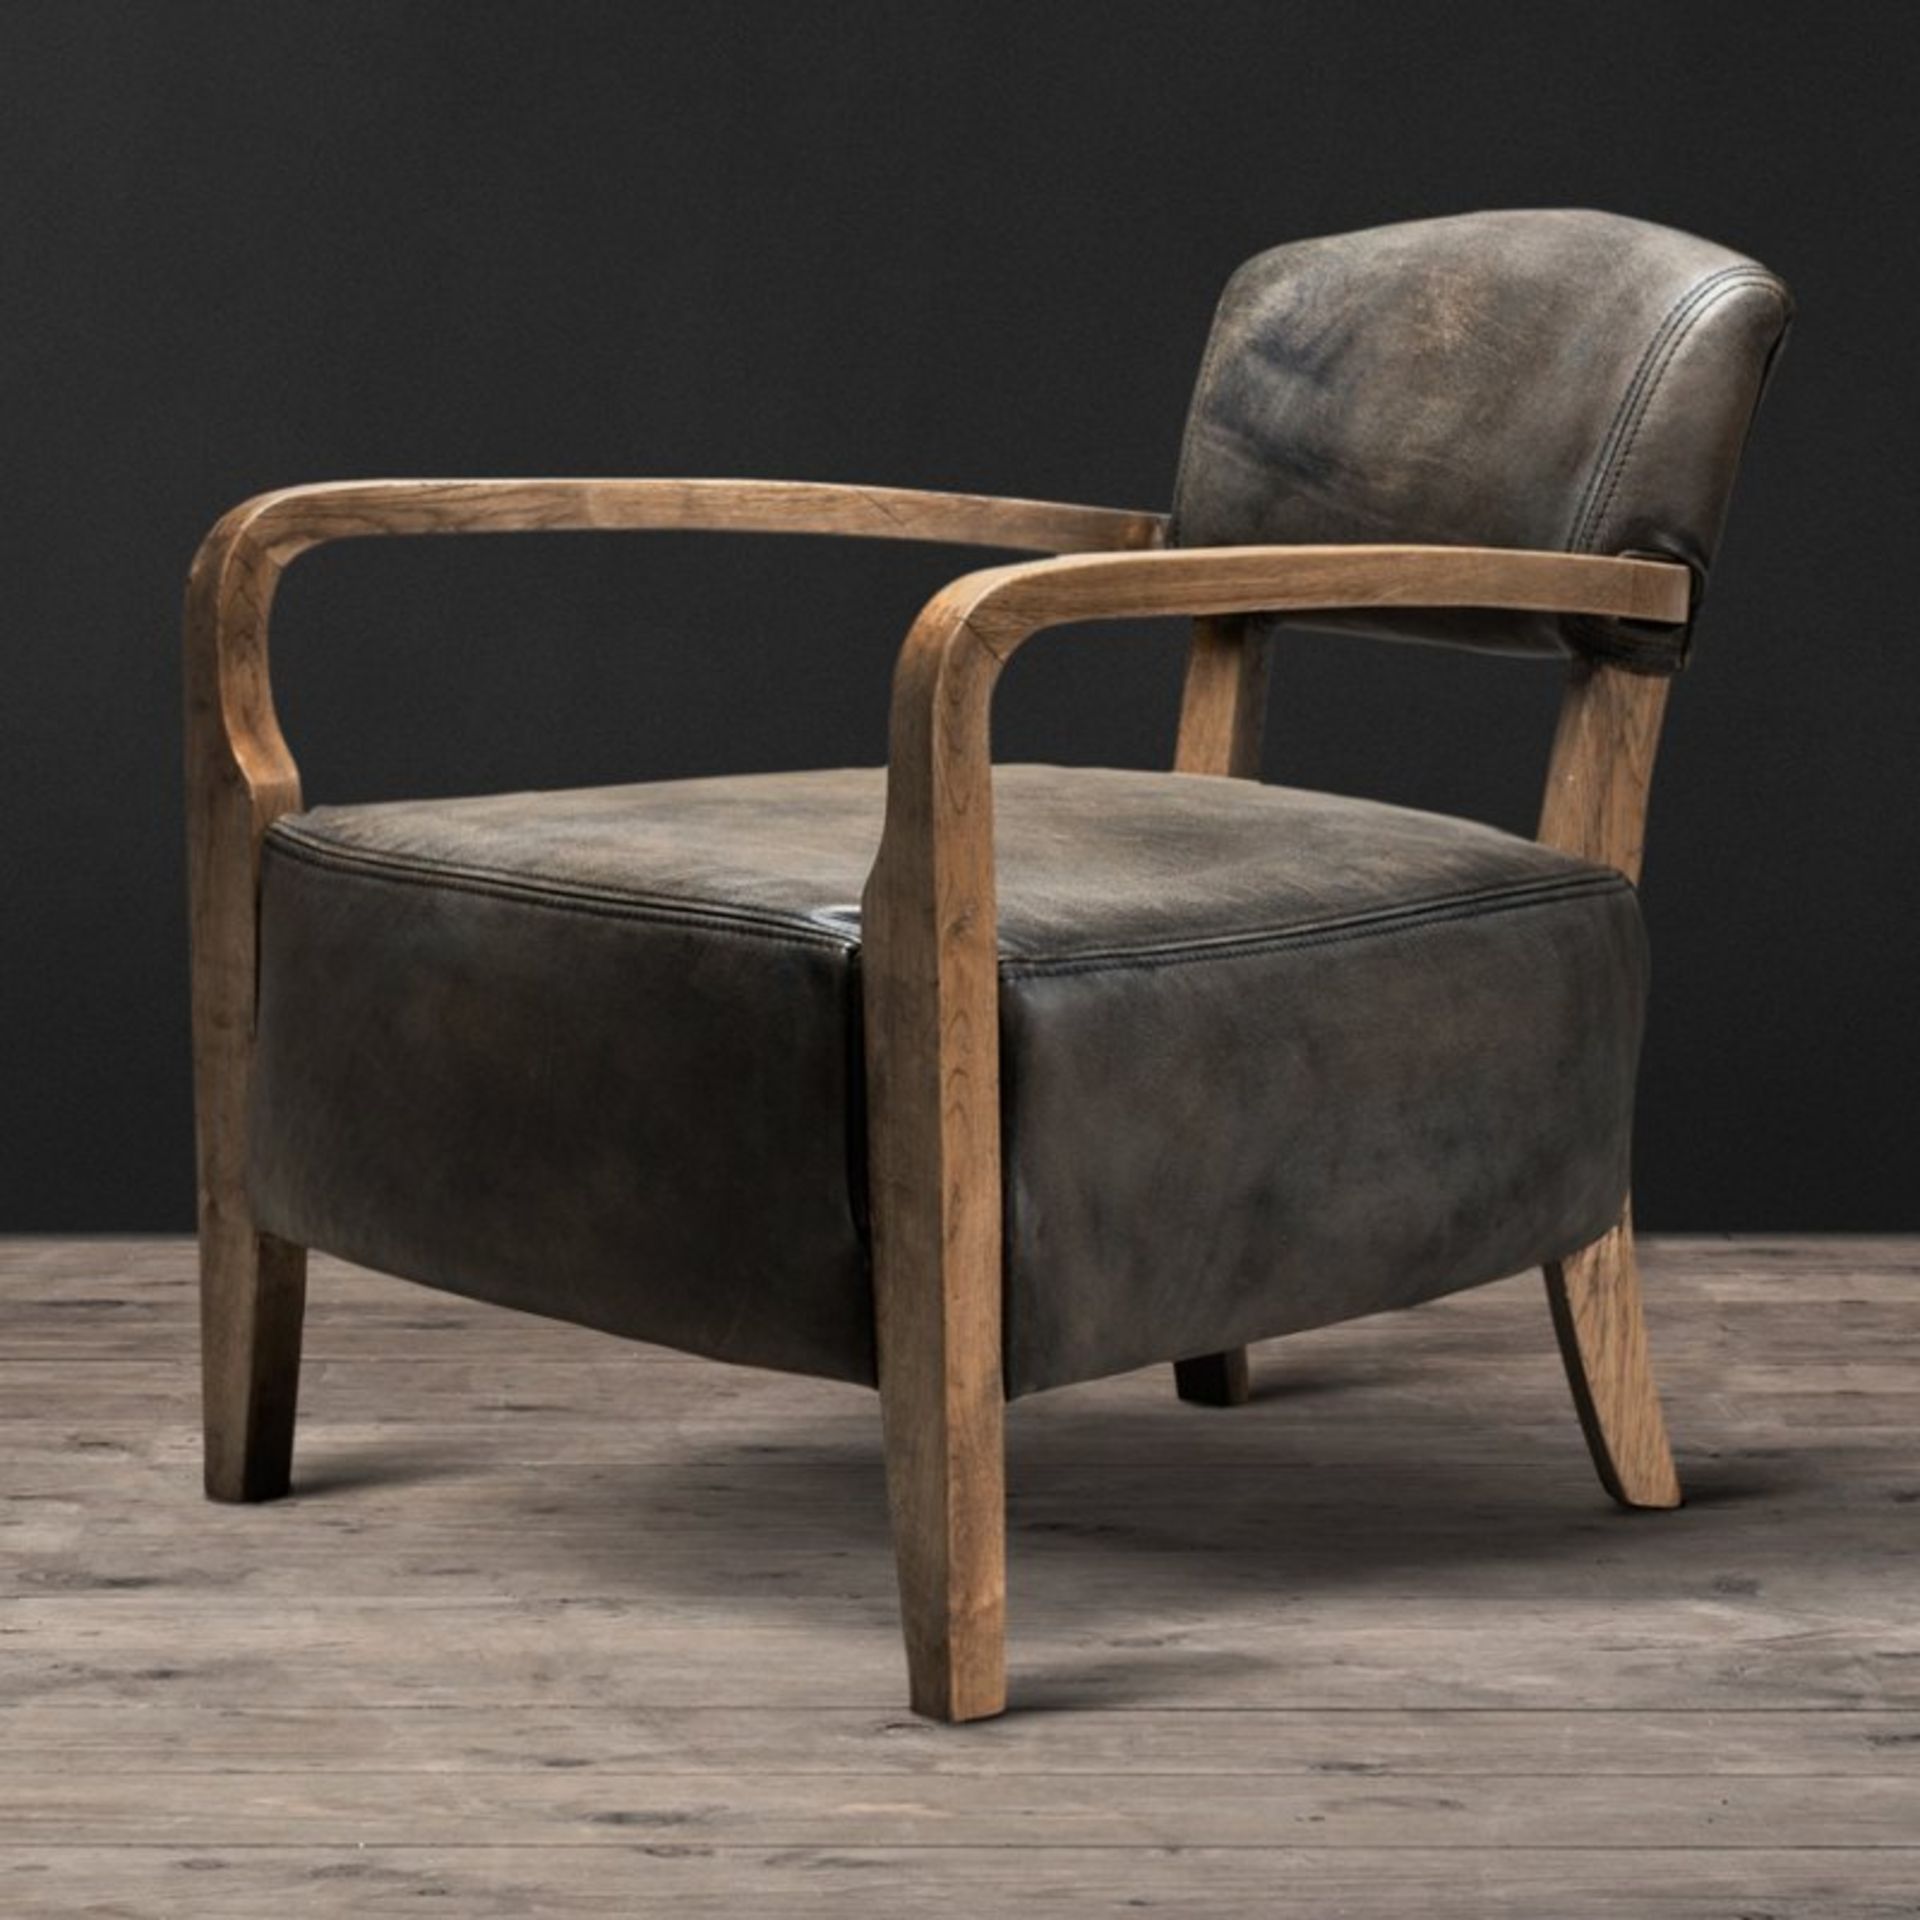 Cabana Chair Vagabond Black Leather And Weathered Oak Inspired By Relaxed Outdoor Lounging, The